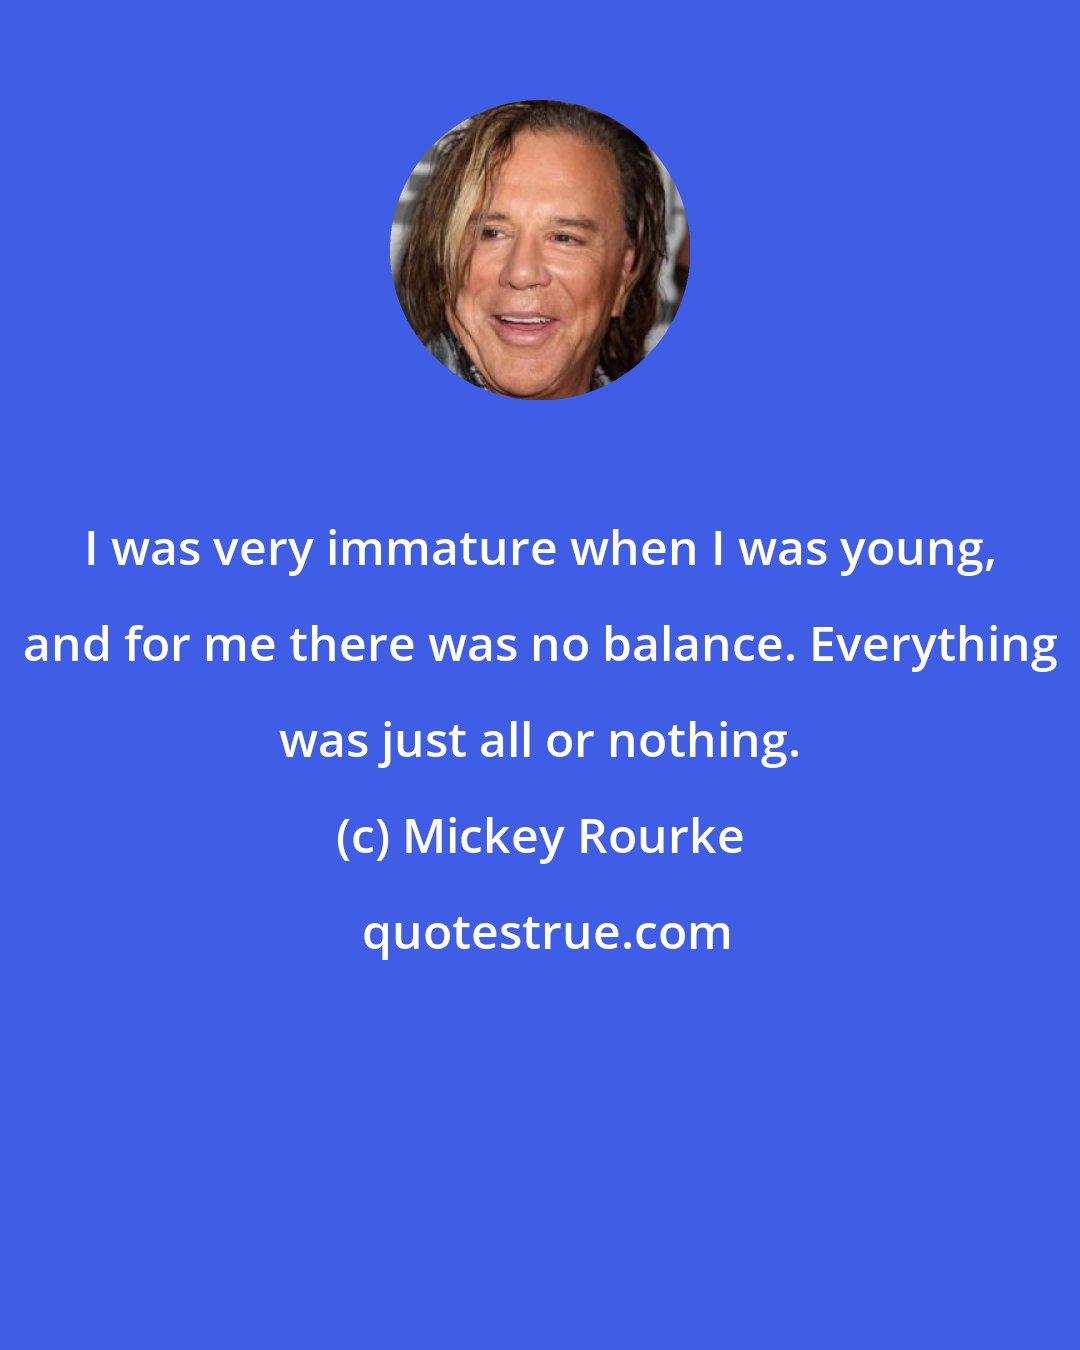 Mickey Rourke: I was very immature when I was young, and for me there was no balance. Everything was just all or nothing.